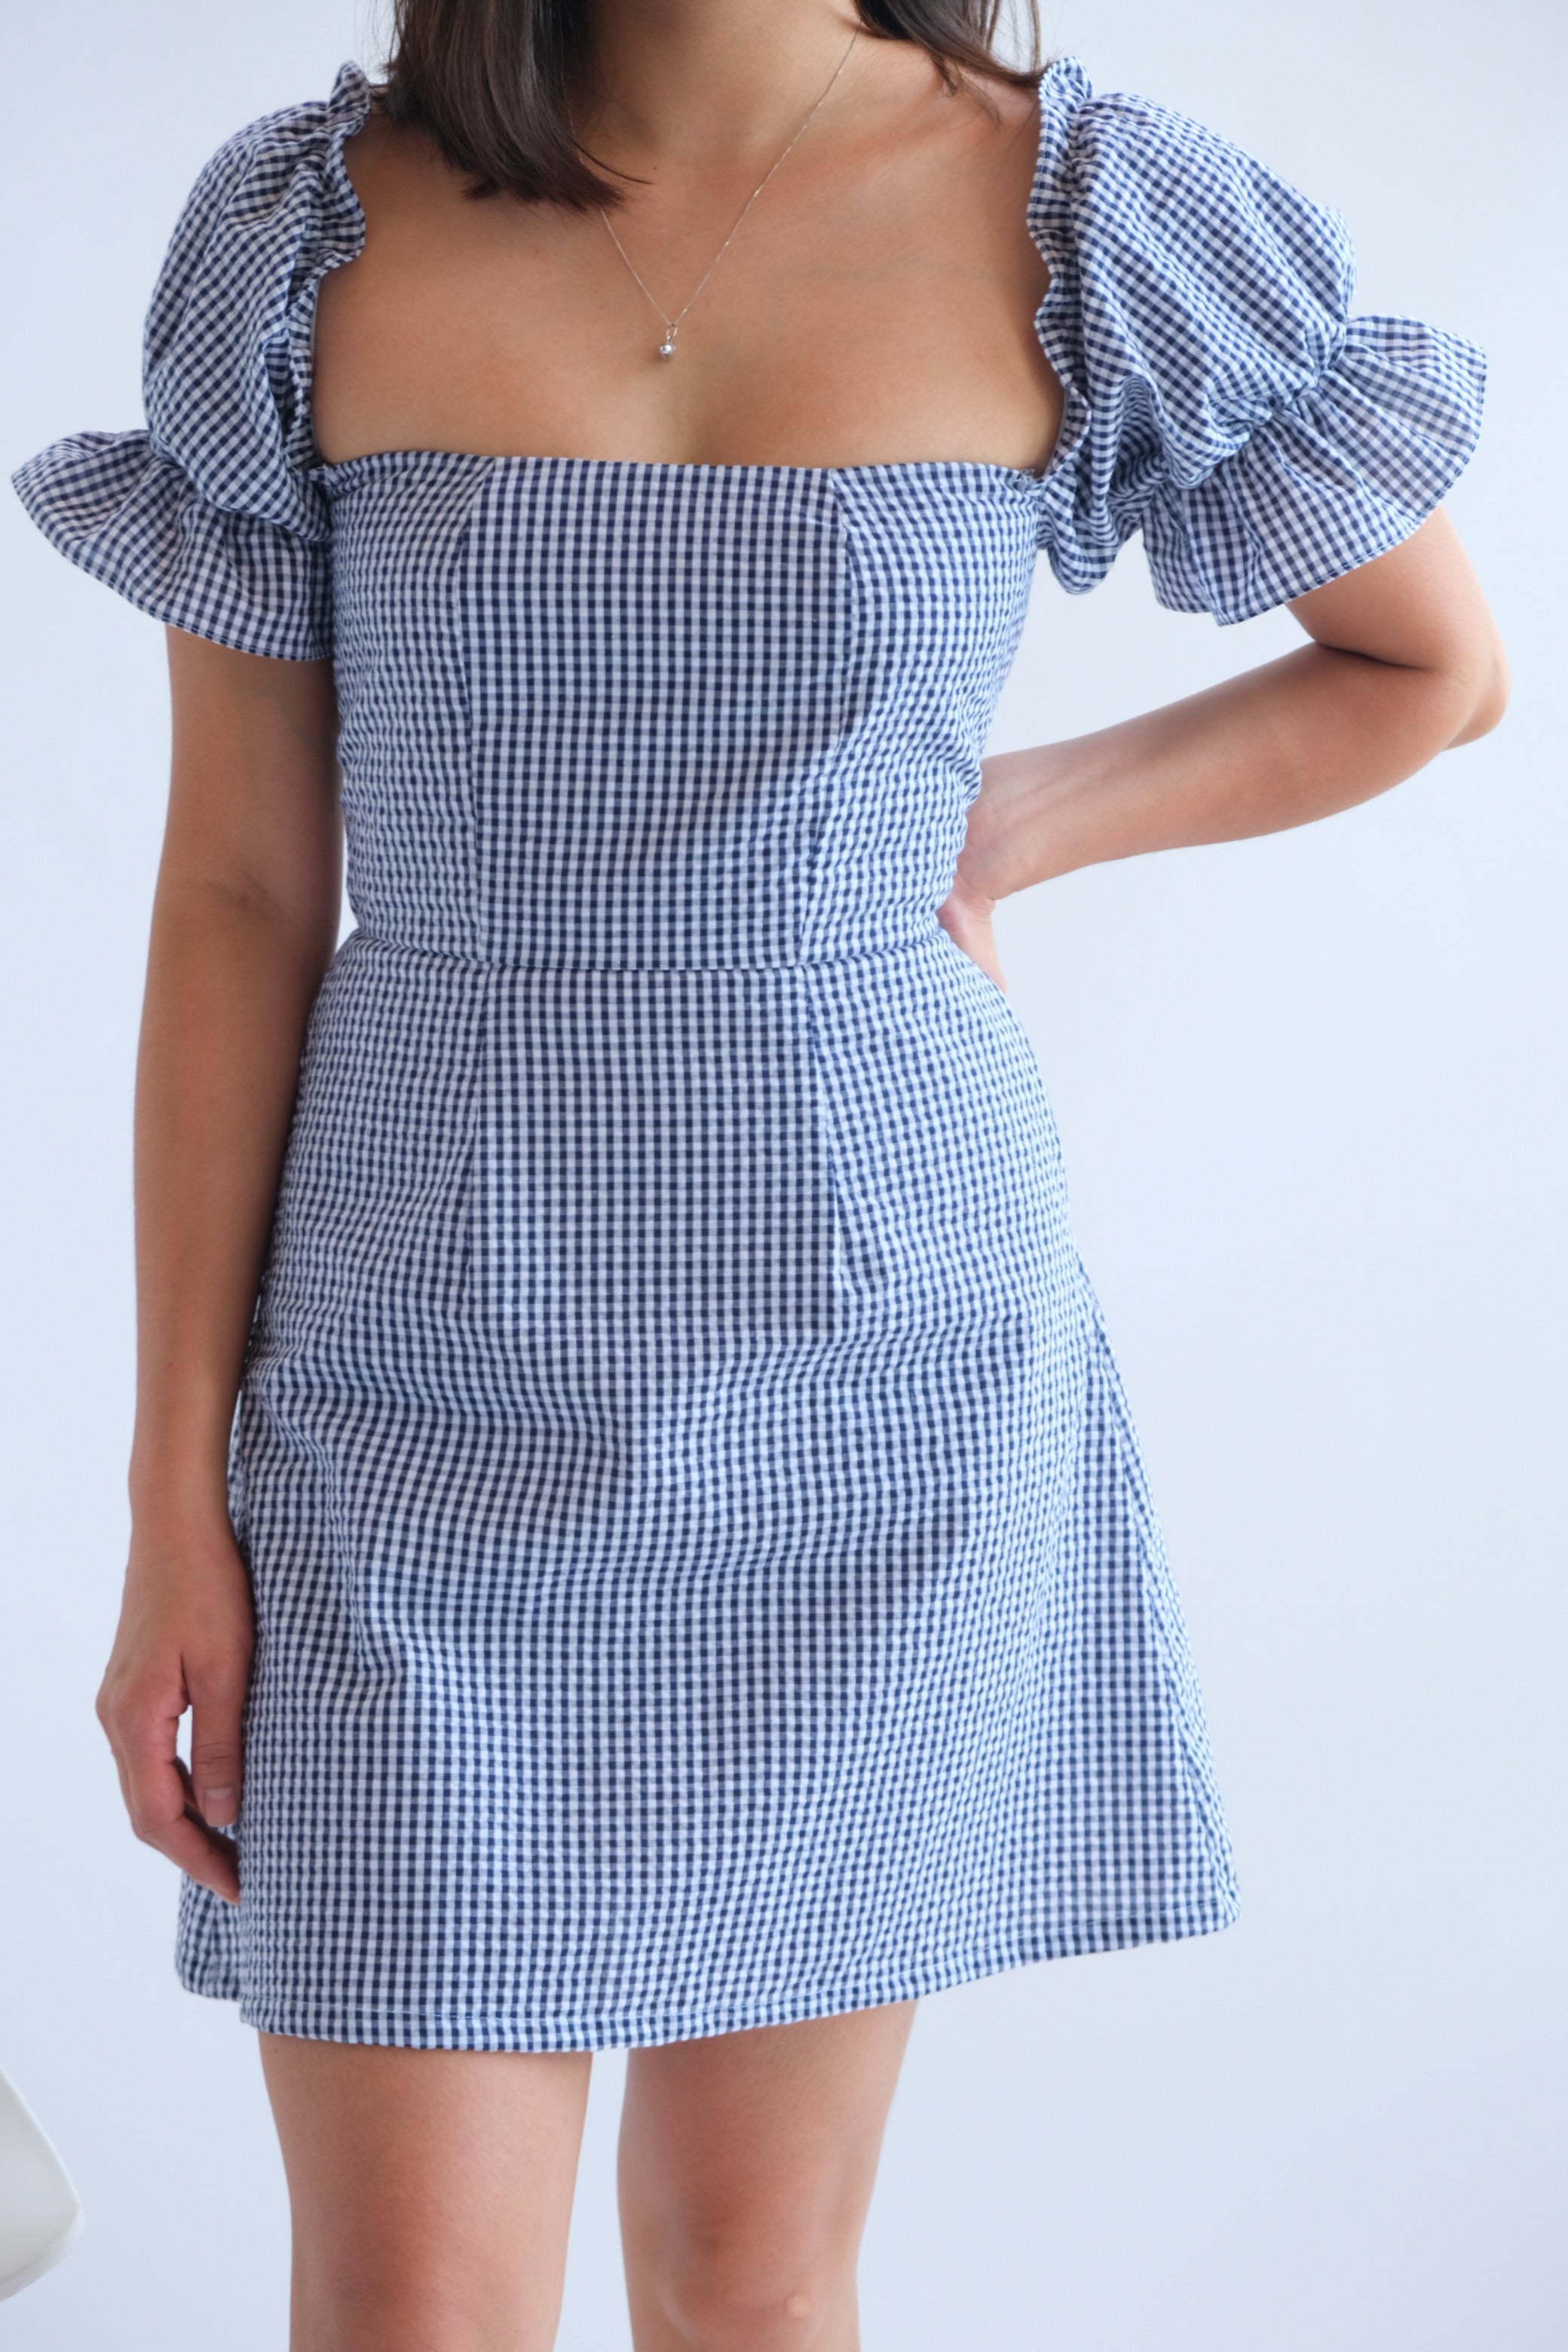 Clarence in Gingham Love